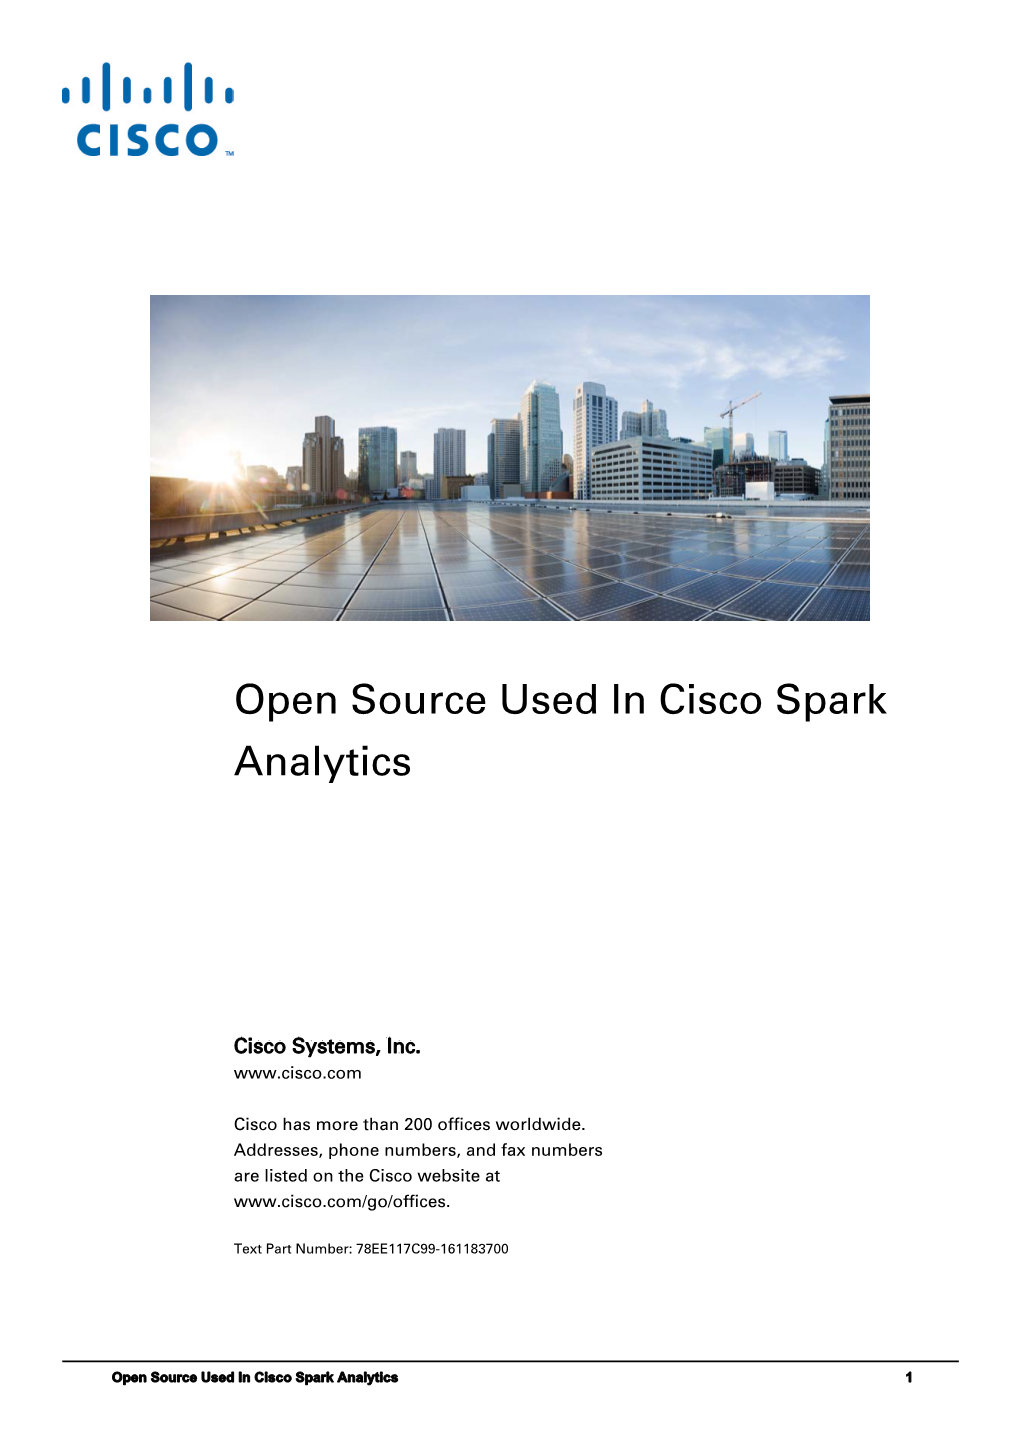 Open Source Used in Cisco Spark Analytics